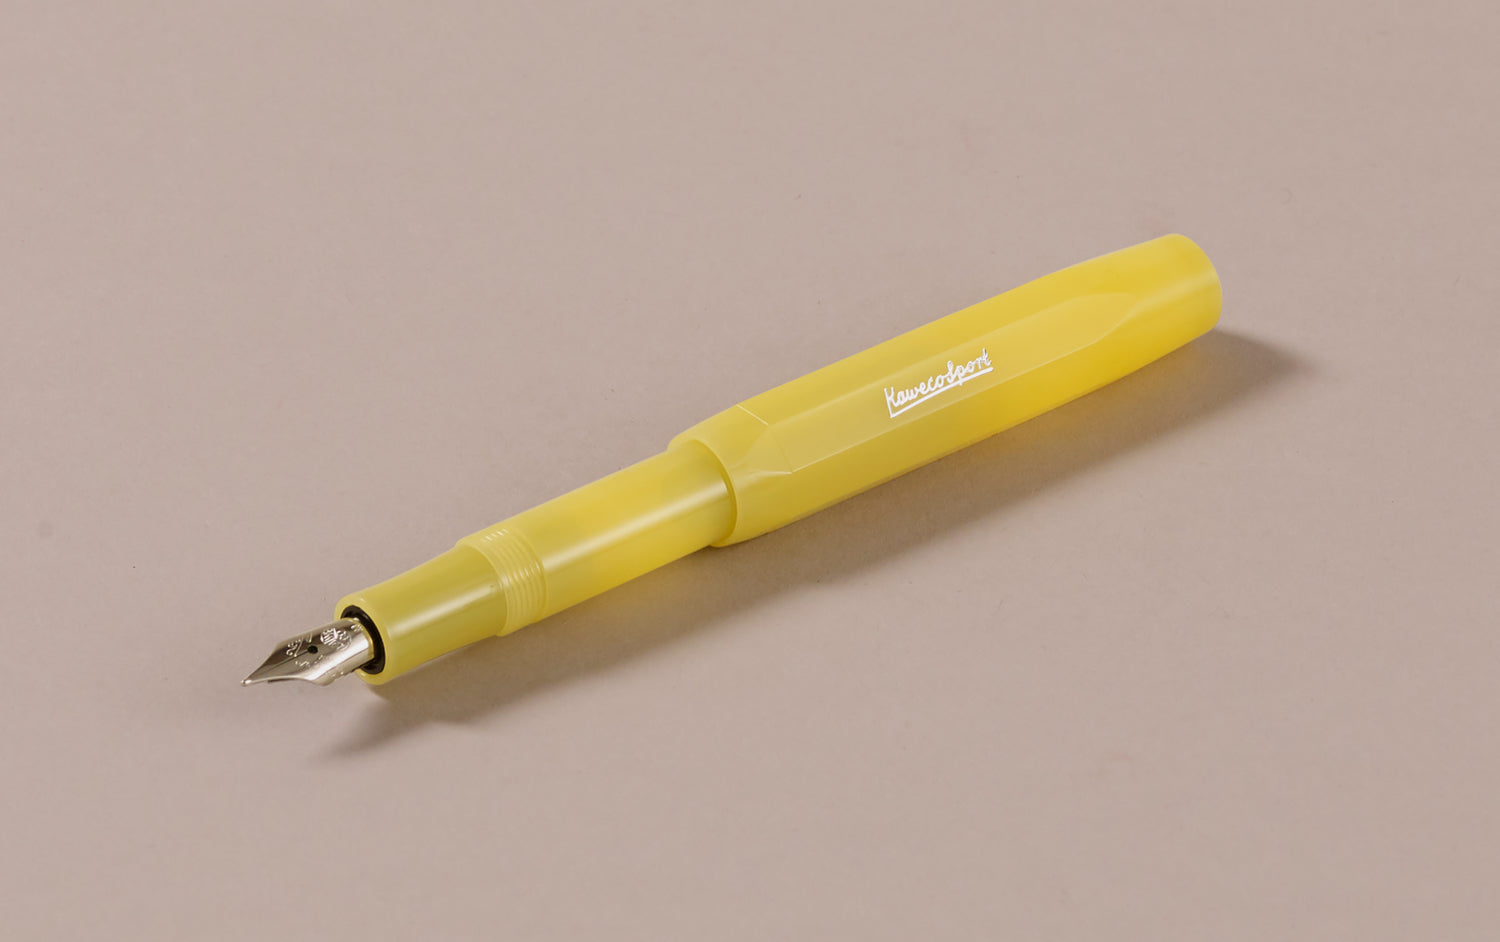 Sweet Banana Kaweco Frosted Sport Fountain Pen